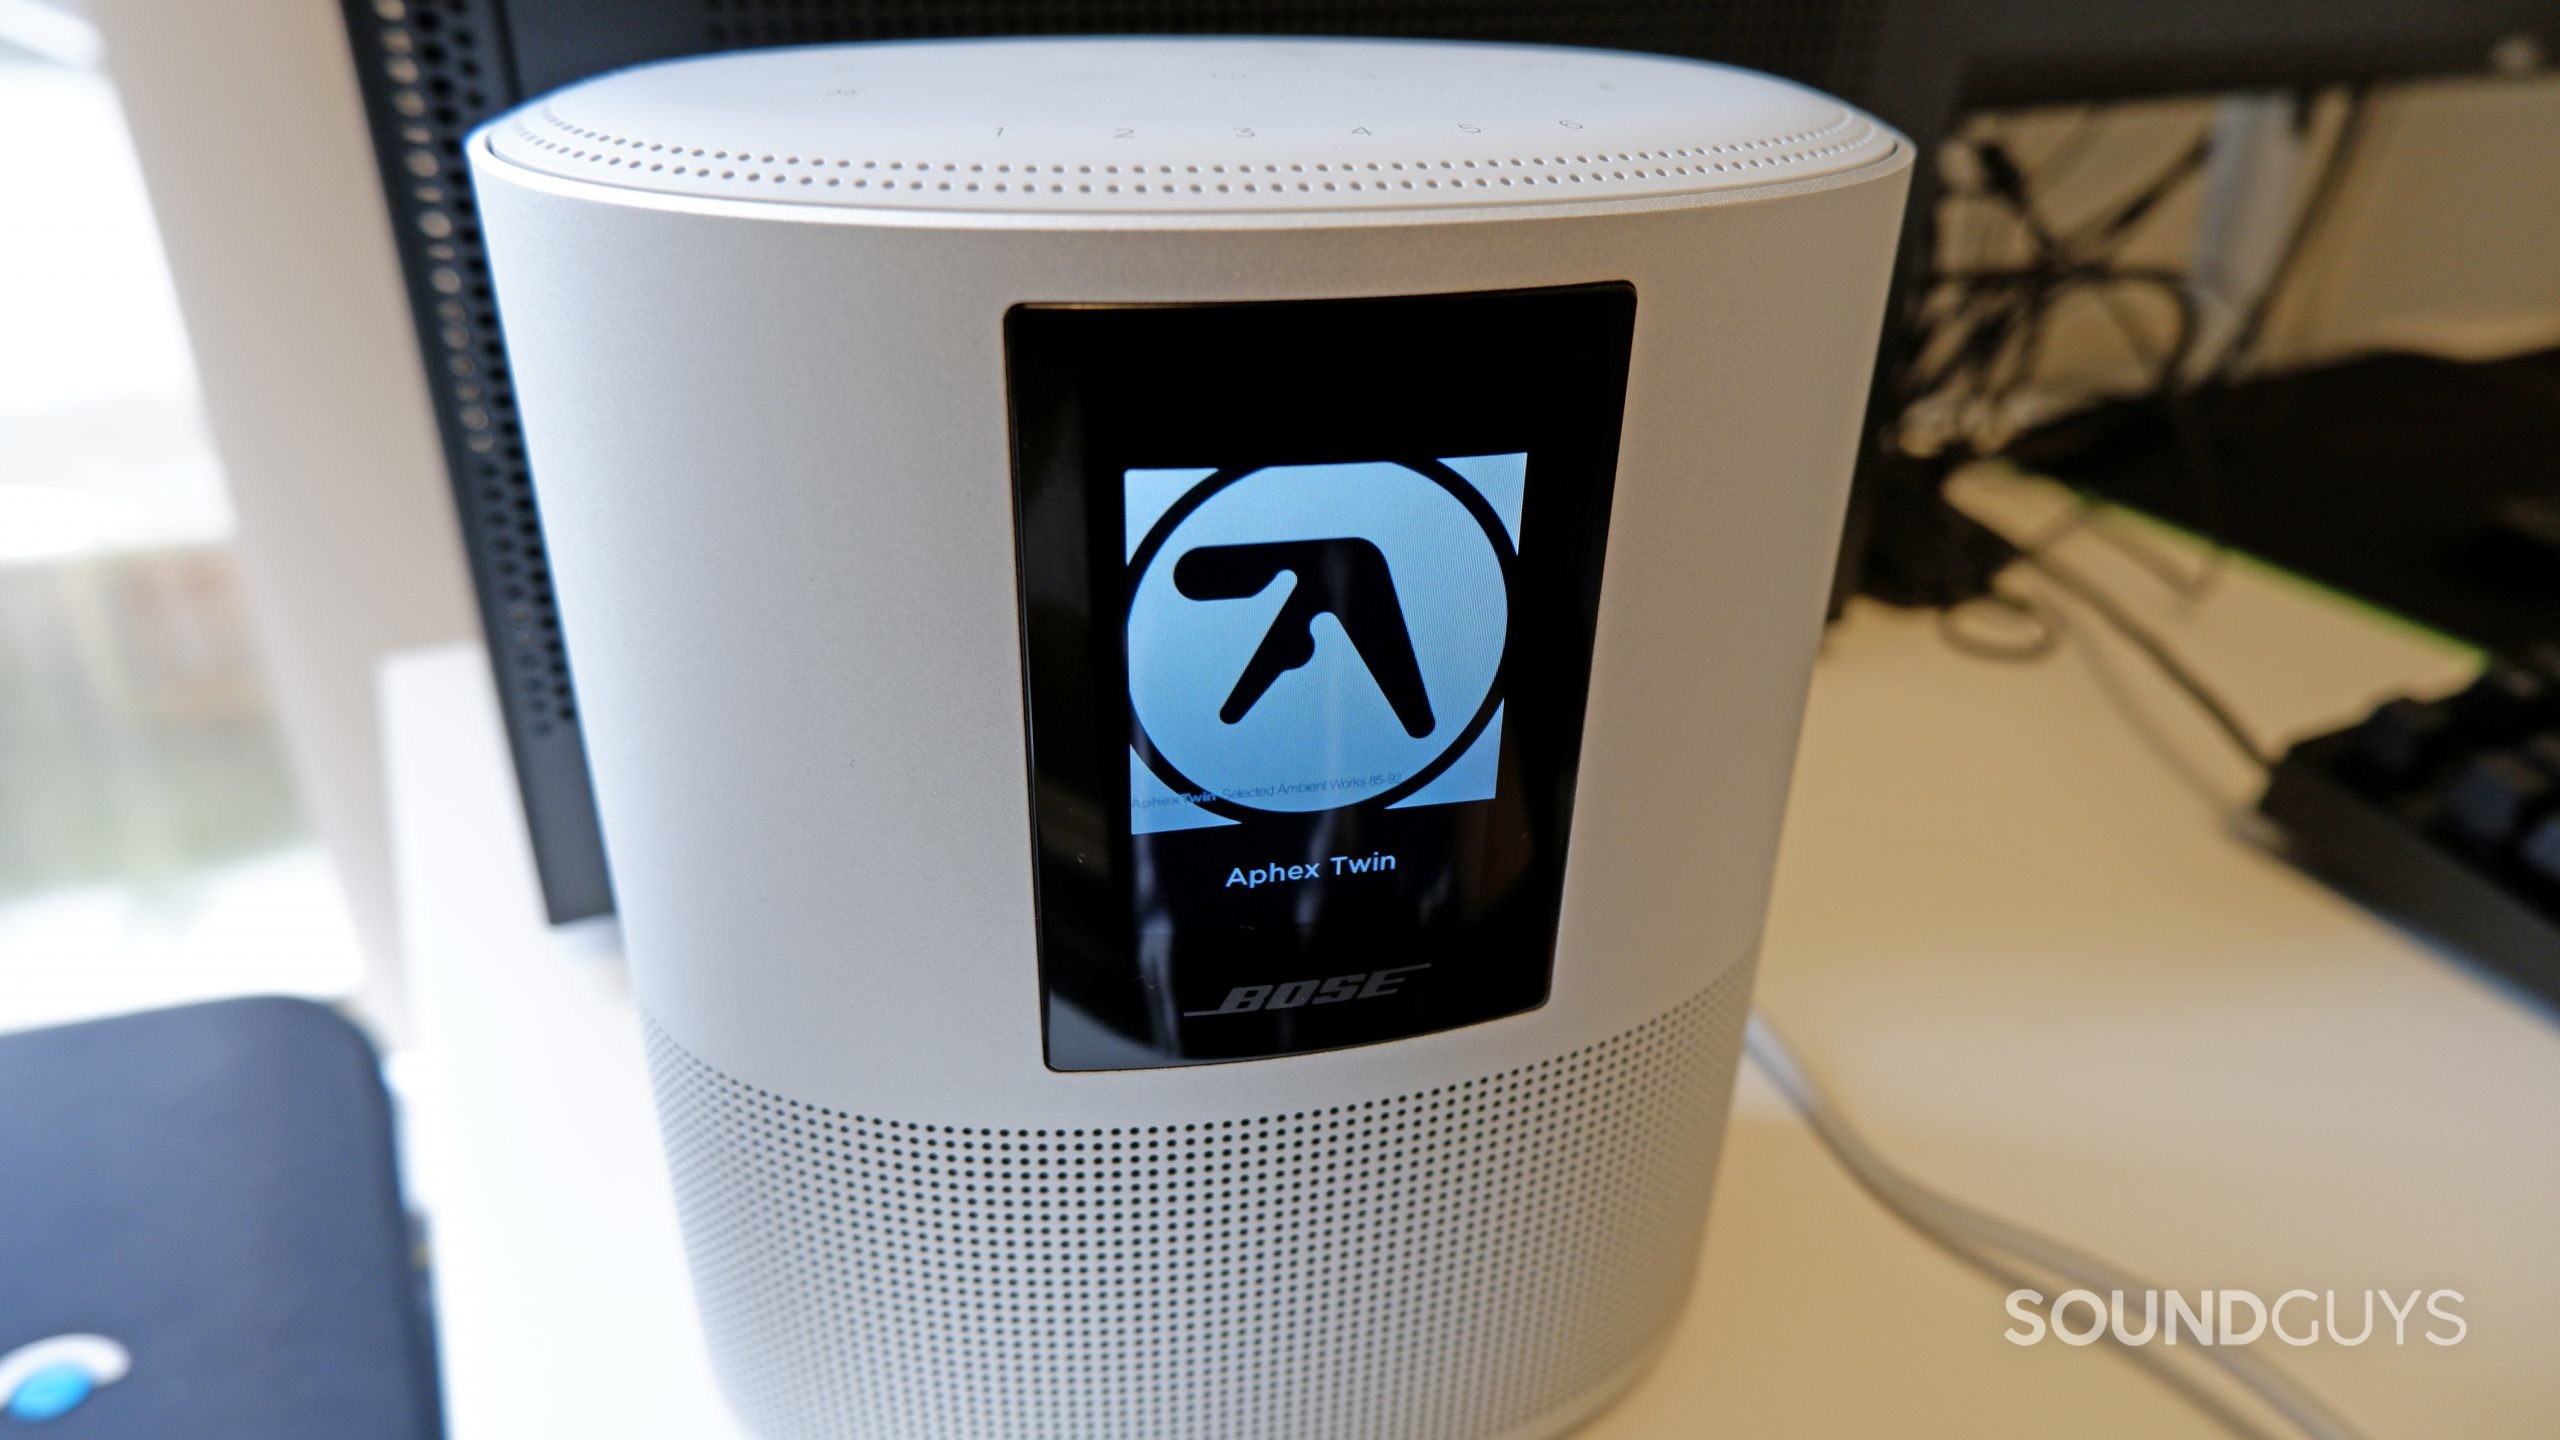 The Bose Home Speaker 500 playing Xtal by Aphex Twin, sitting on a white desk in front of a computer.